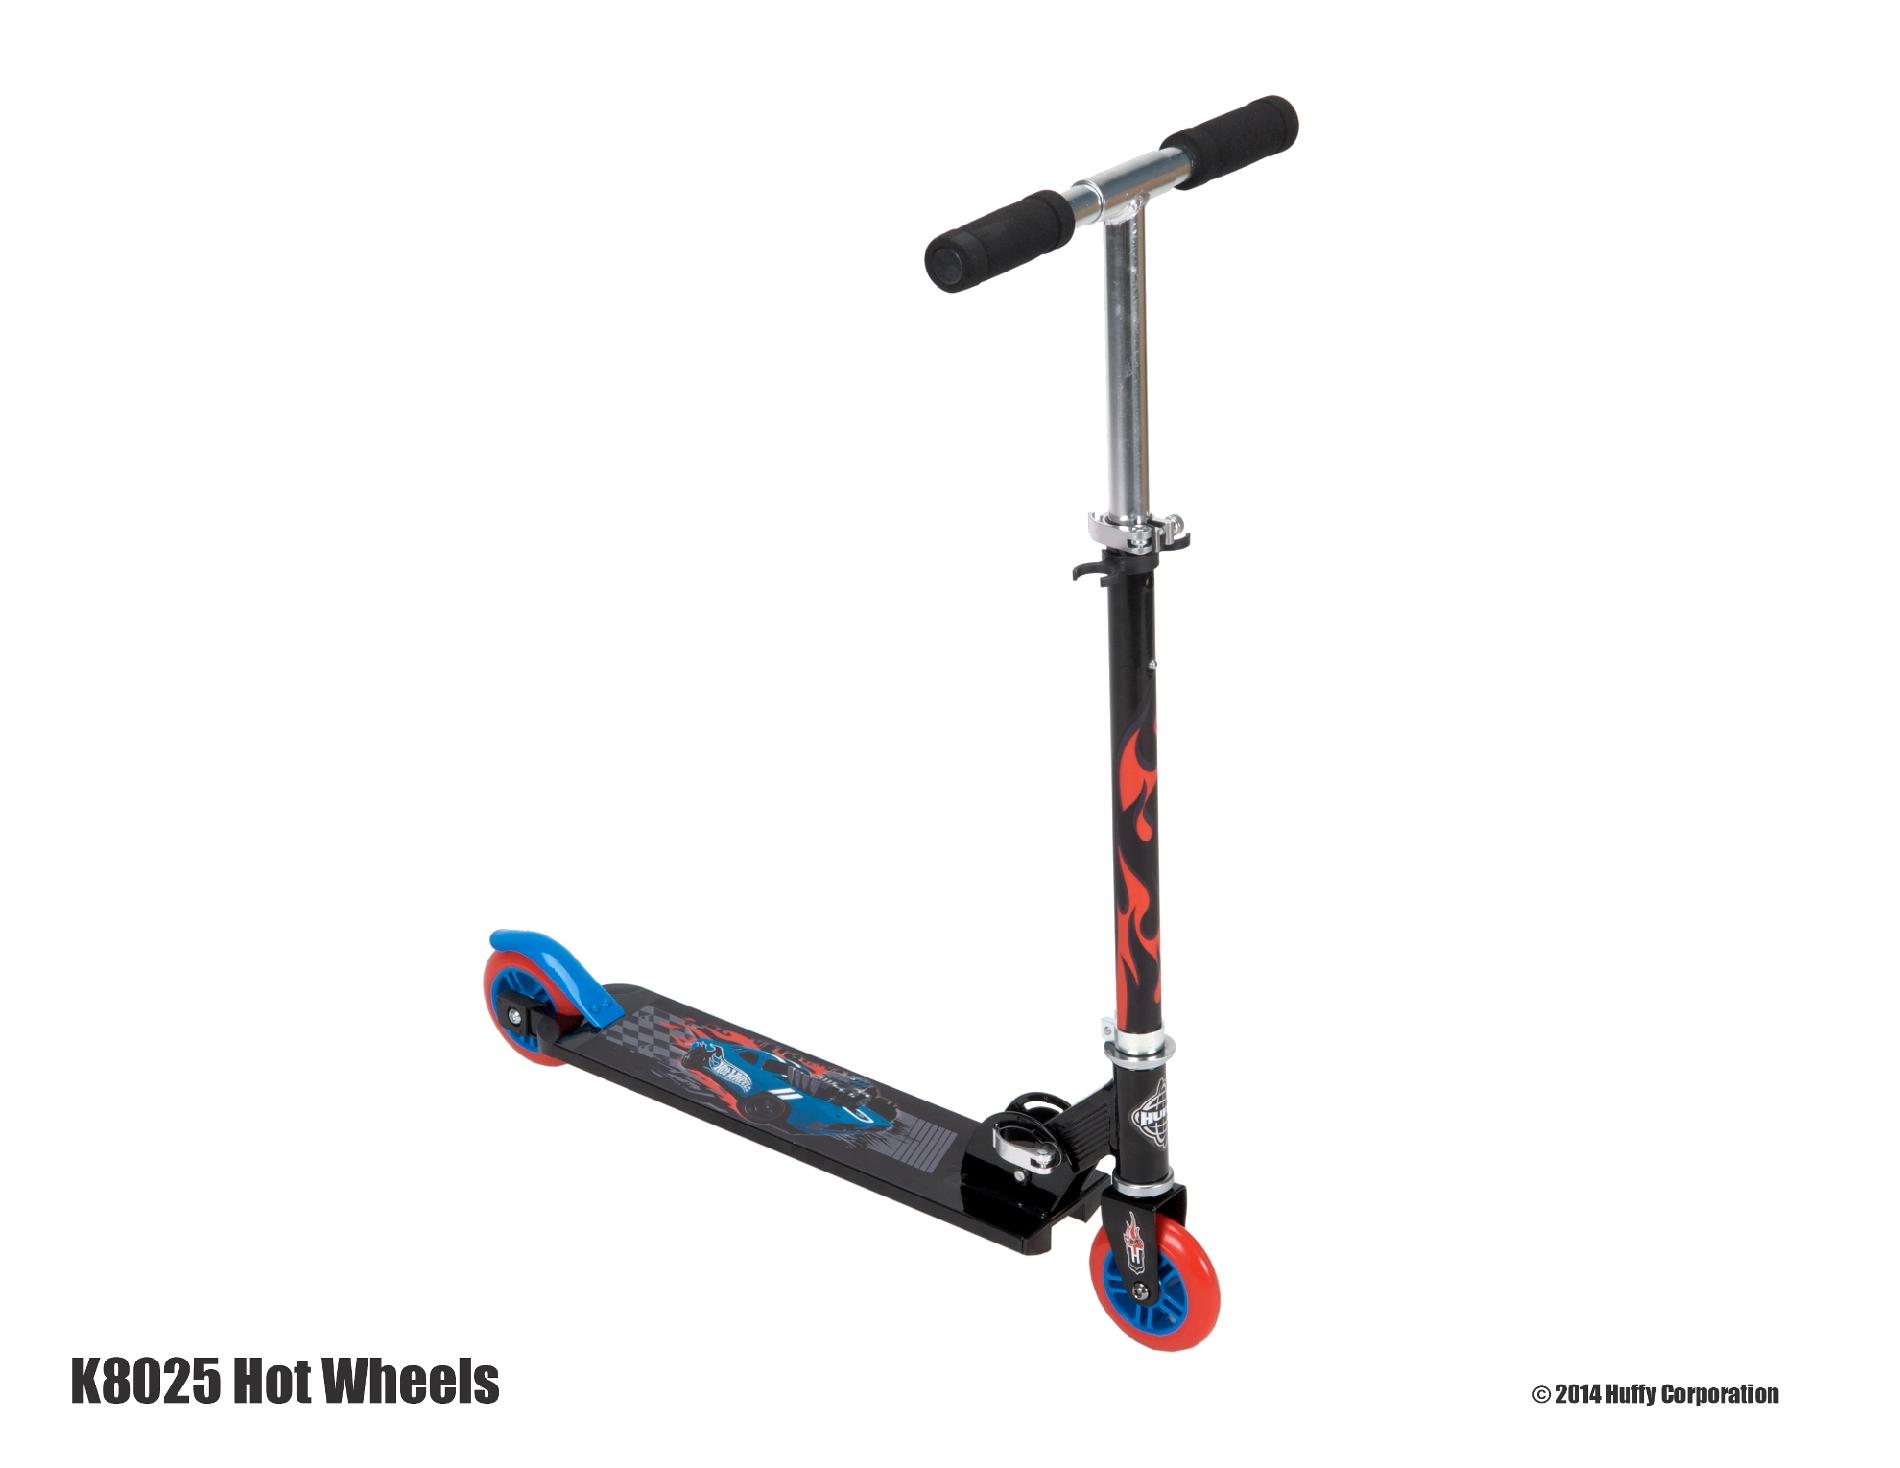 Hot Wheels 2 Scooter Only $11! (Reg $44.99)